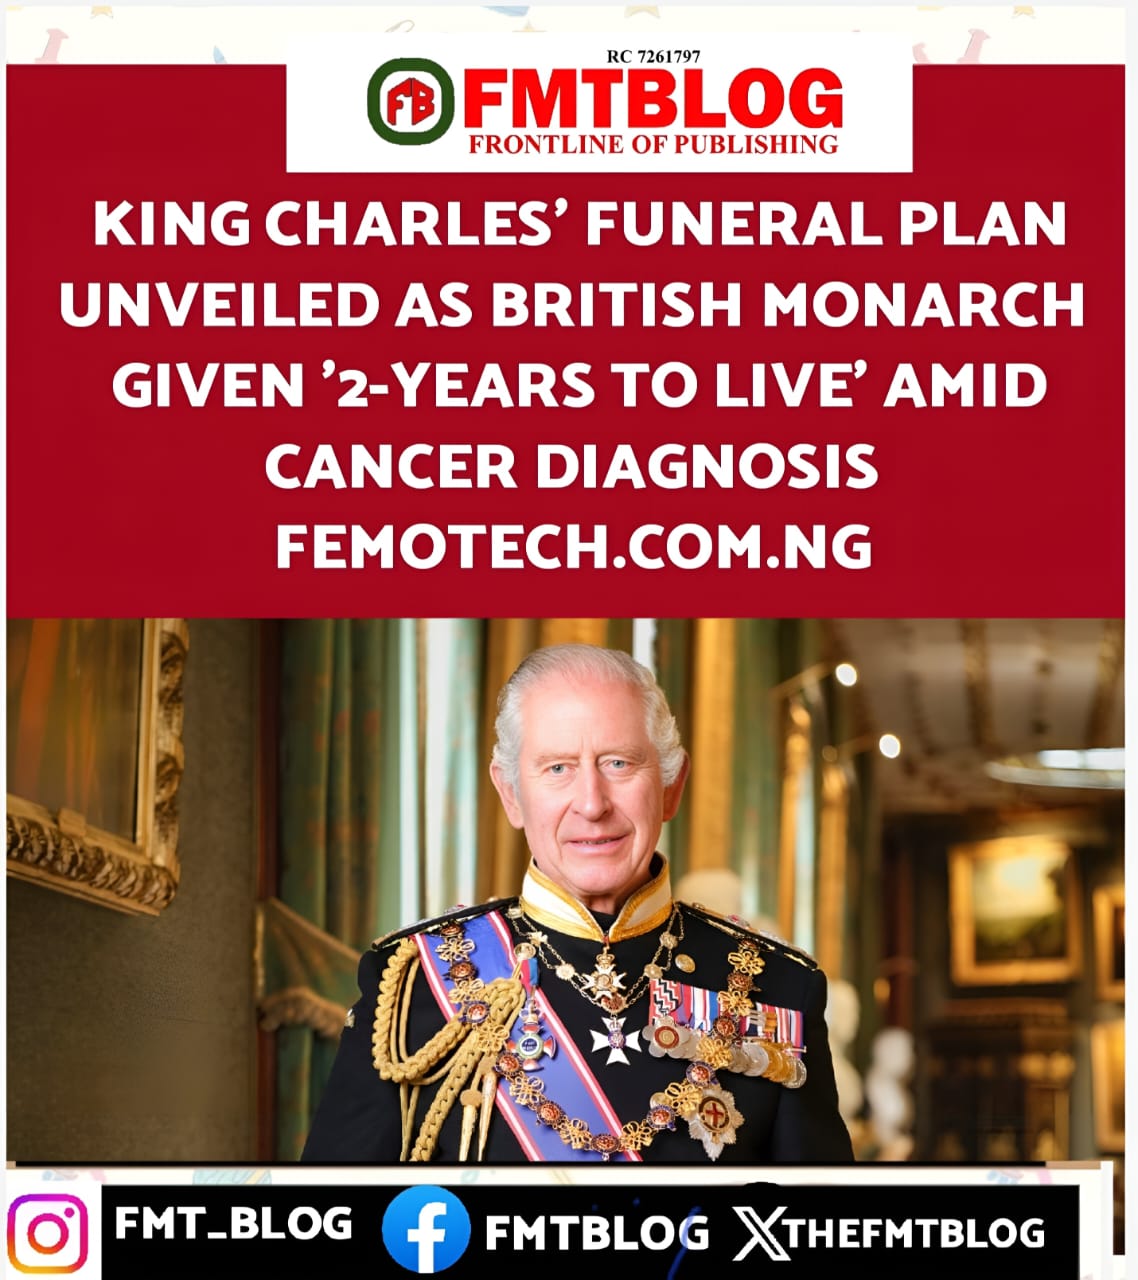 King Charles’ Funeral Plan Unveiled As British Monarch Given ‘2-Years To Live’ Amid Cancer Diagnosis